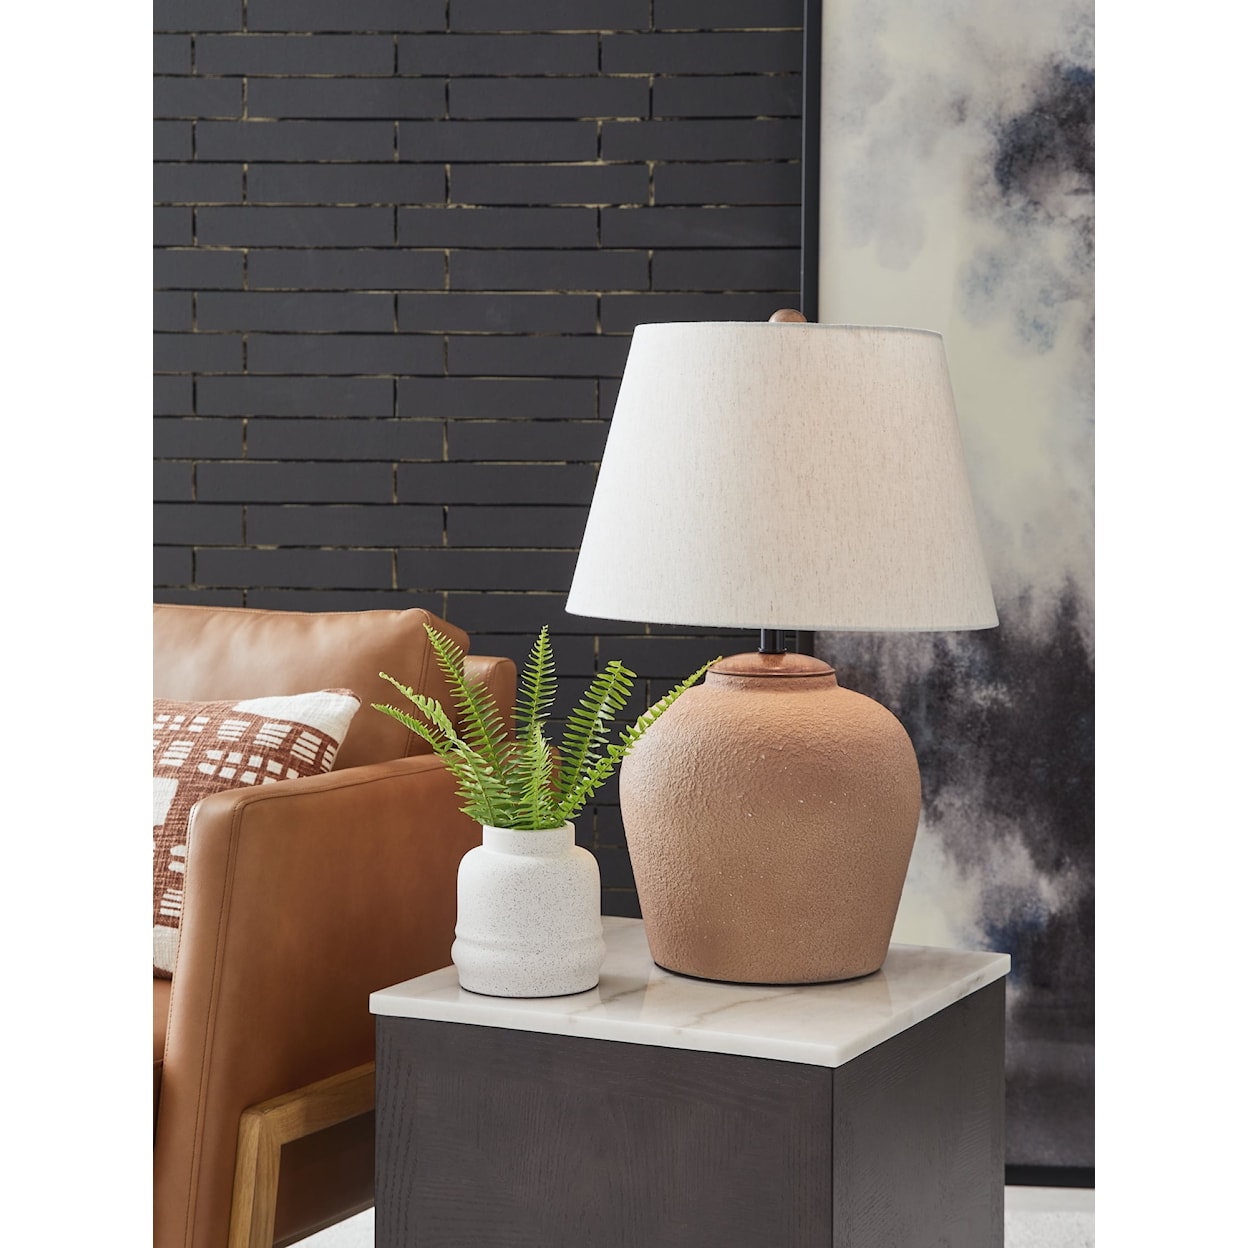 Signature Design by Ashley Scantor Metal Table Lamp